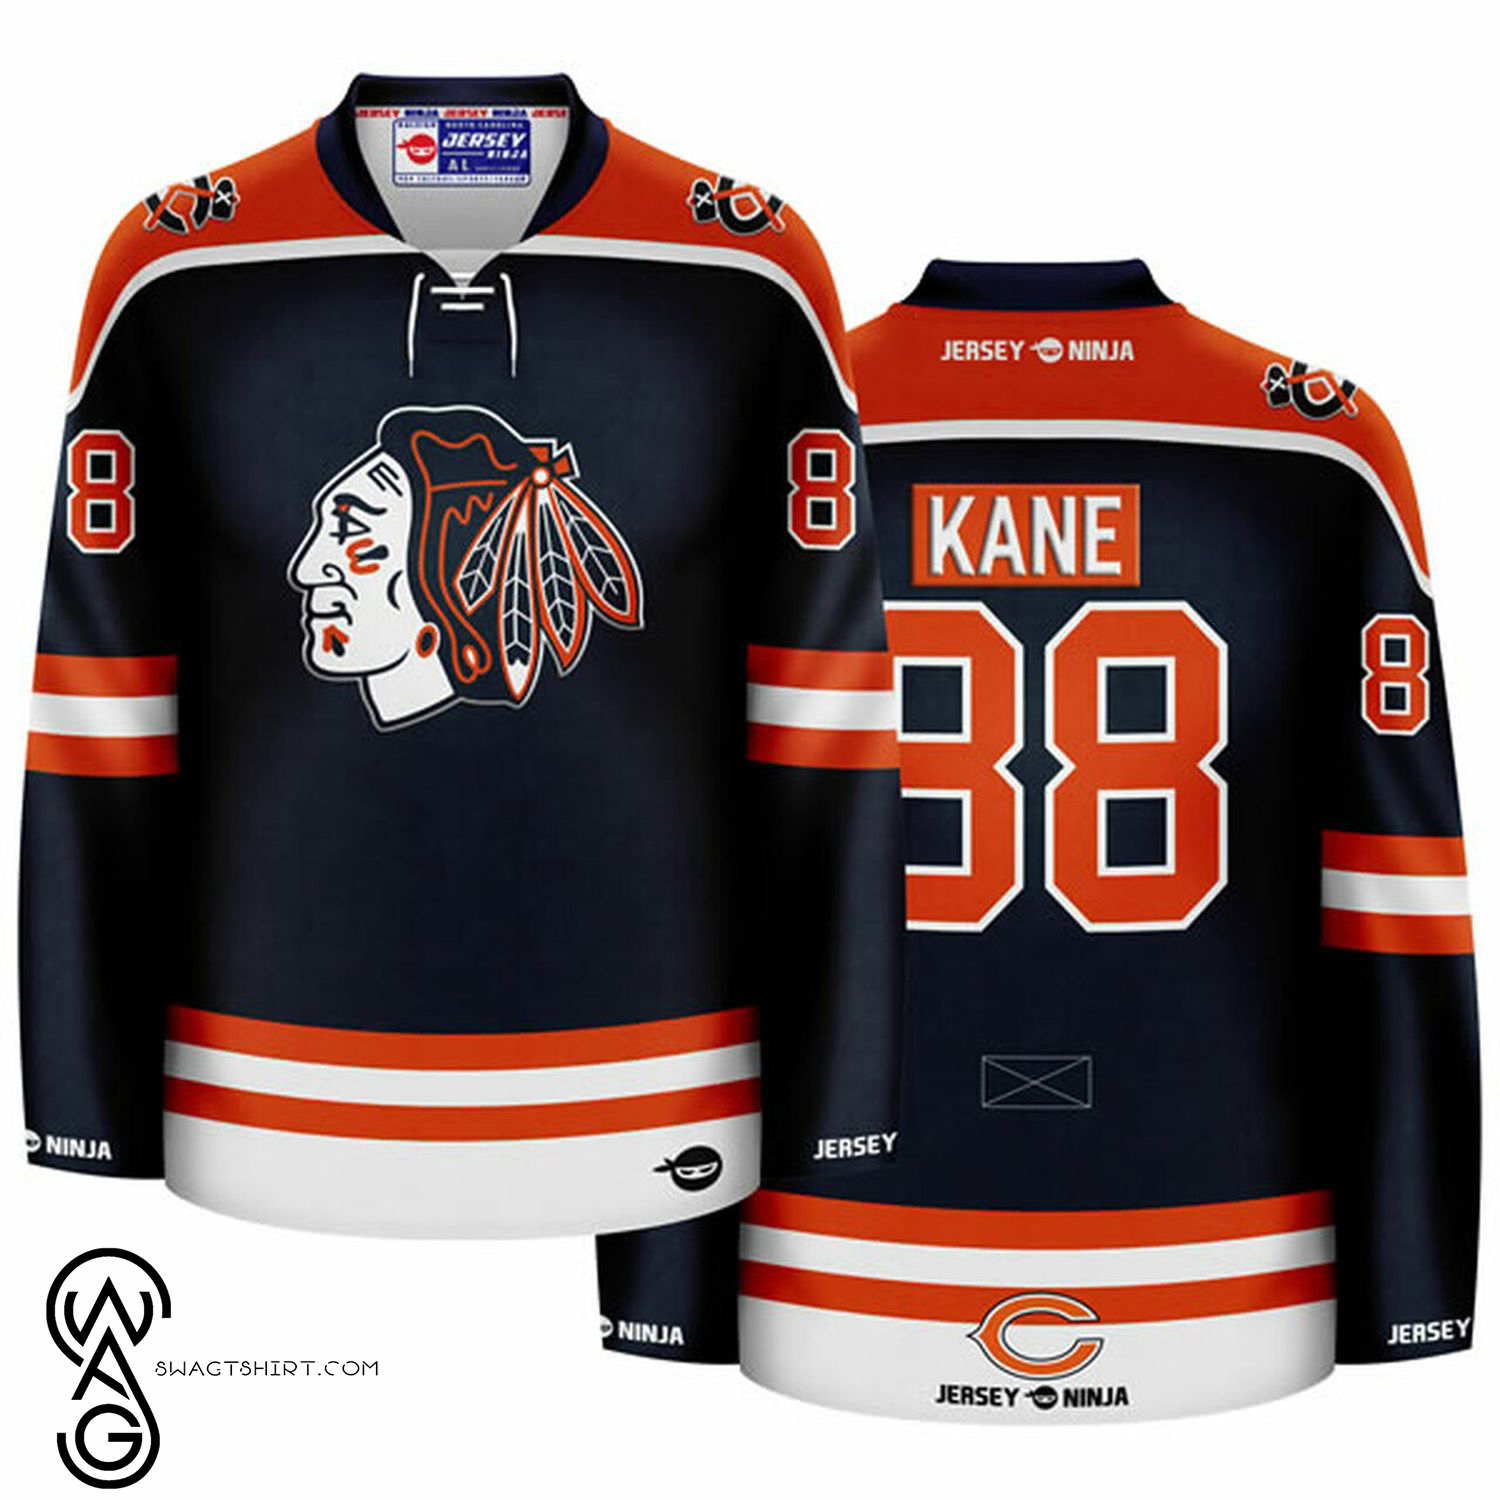 The warm-up jersey for Patrick Kane of the Chicago Blackhawks is